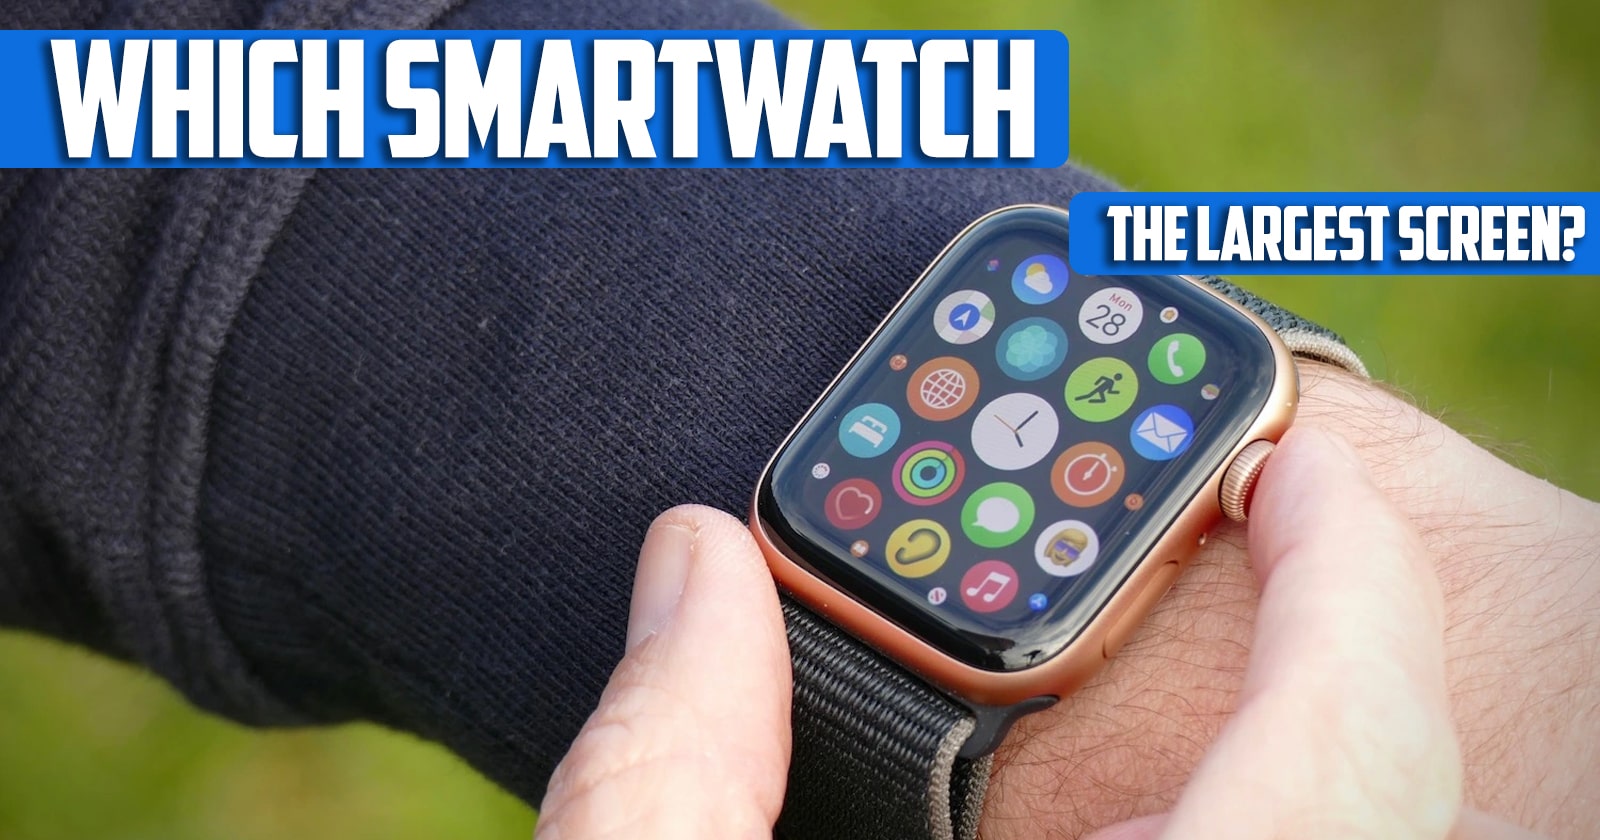 which smartwatch has the largest screen؟